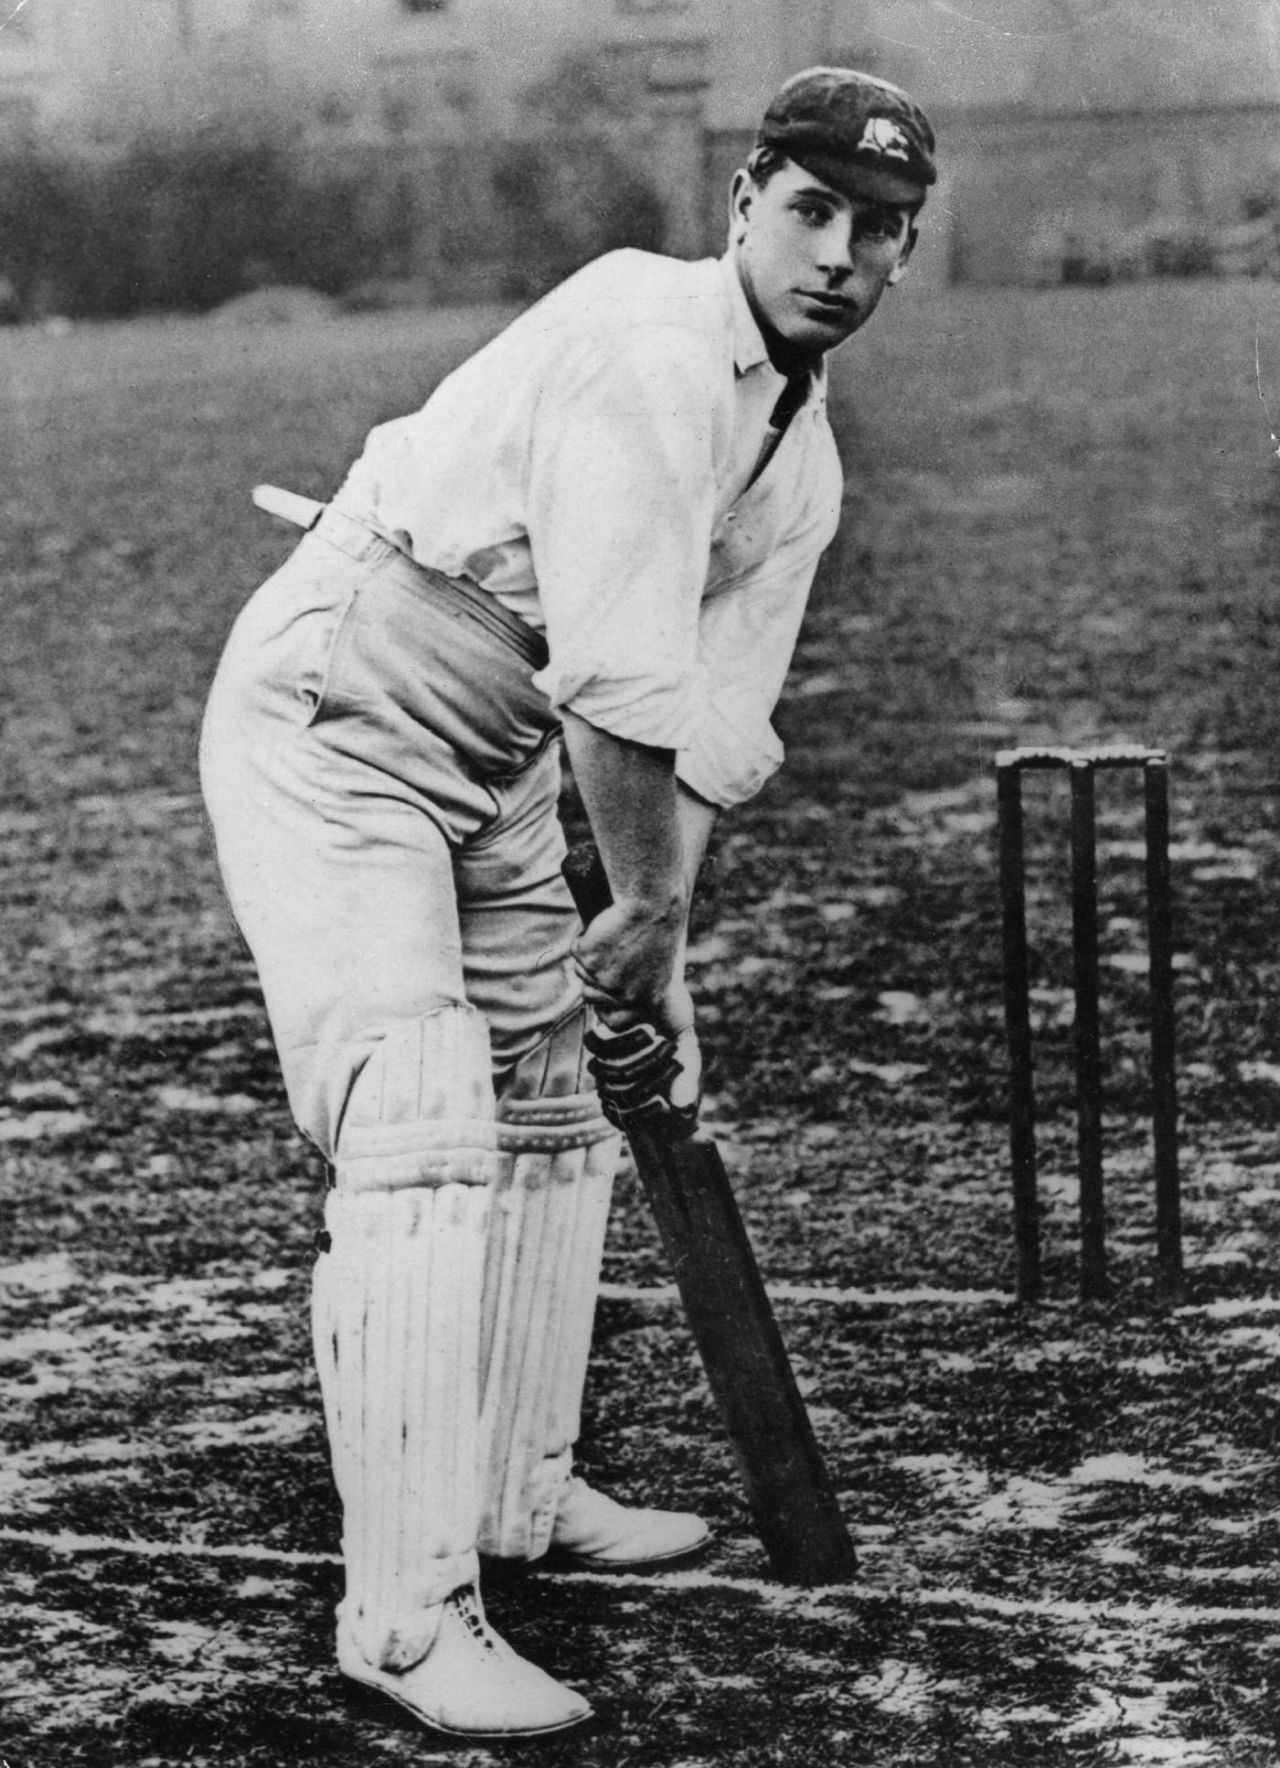 Clem Hill at the crease, 1902